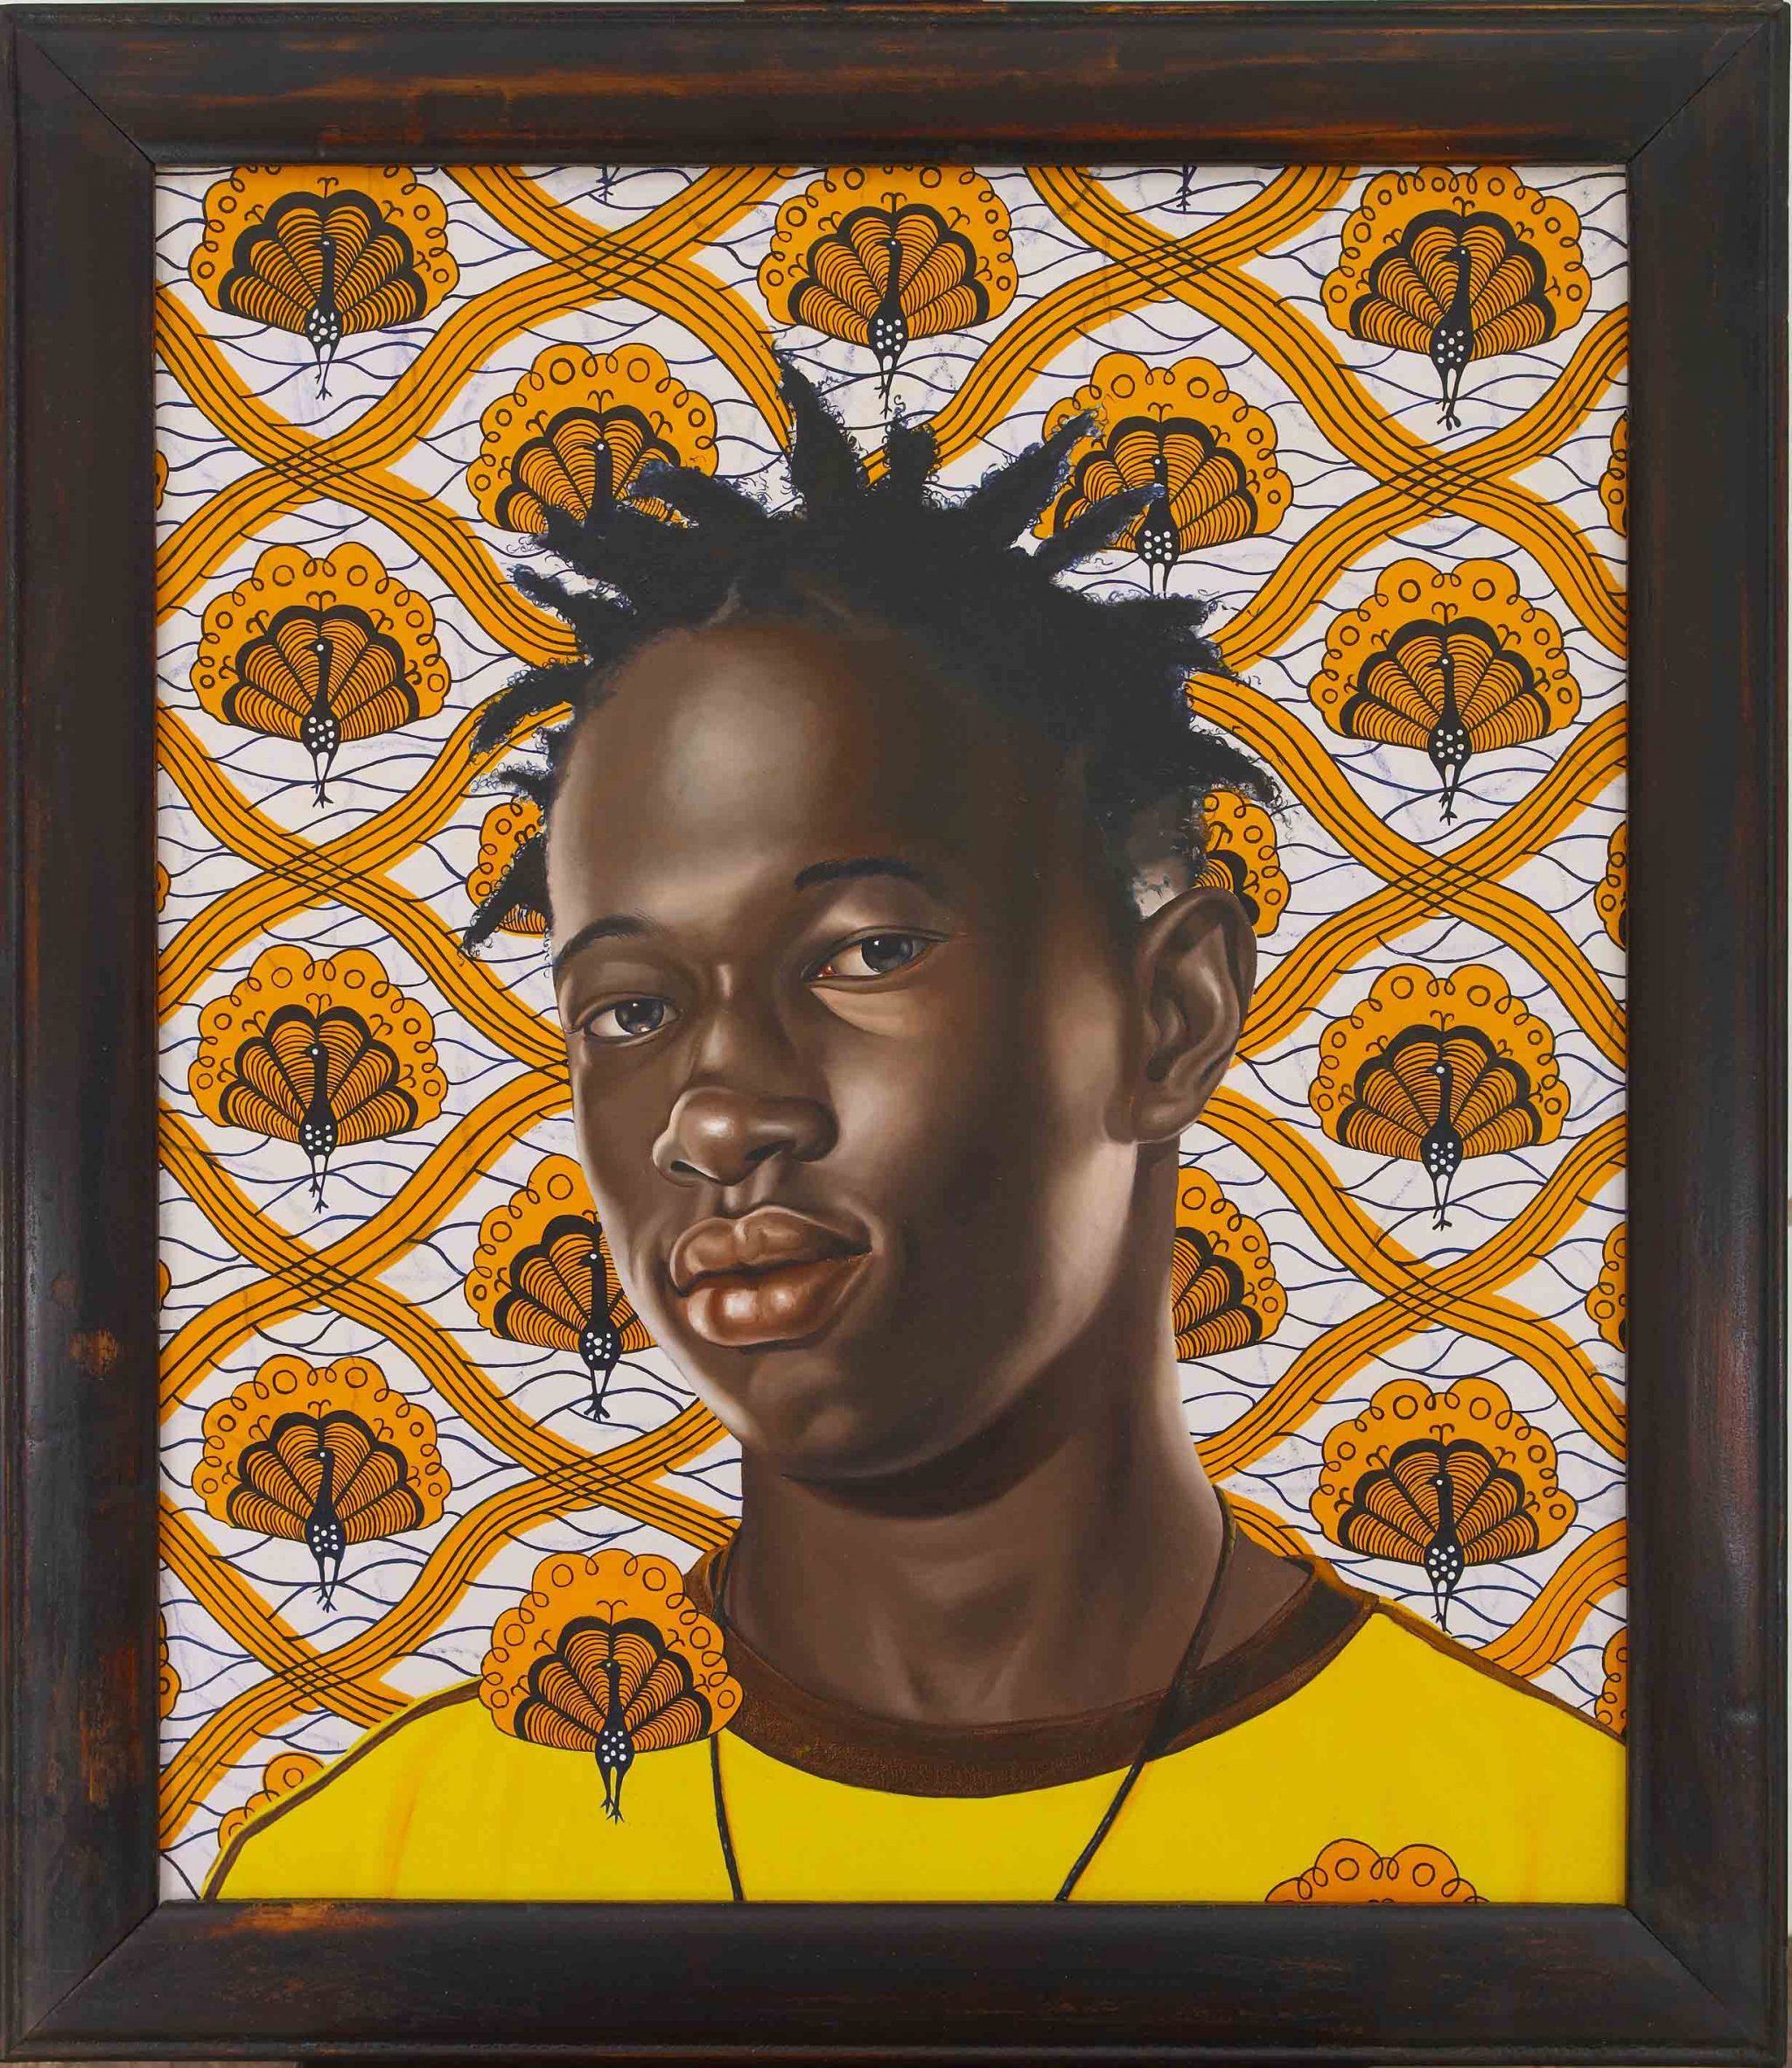 Kehinde Wiley | The World Stage: Africa, Lagos-Dakar, The Studio Museum in Harlem, New York City, USA, July 17 - October 26, 2008 | 6